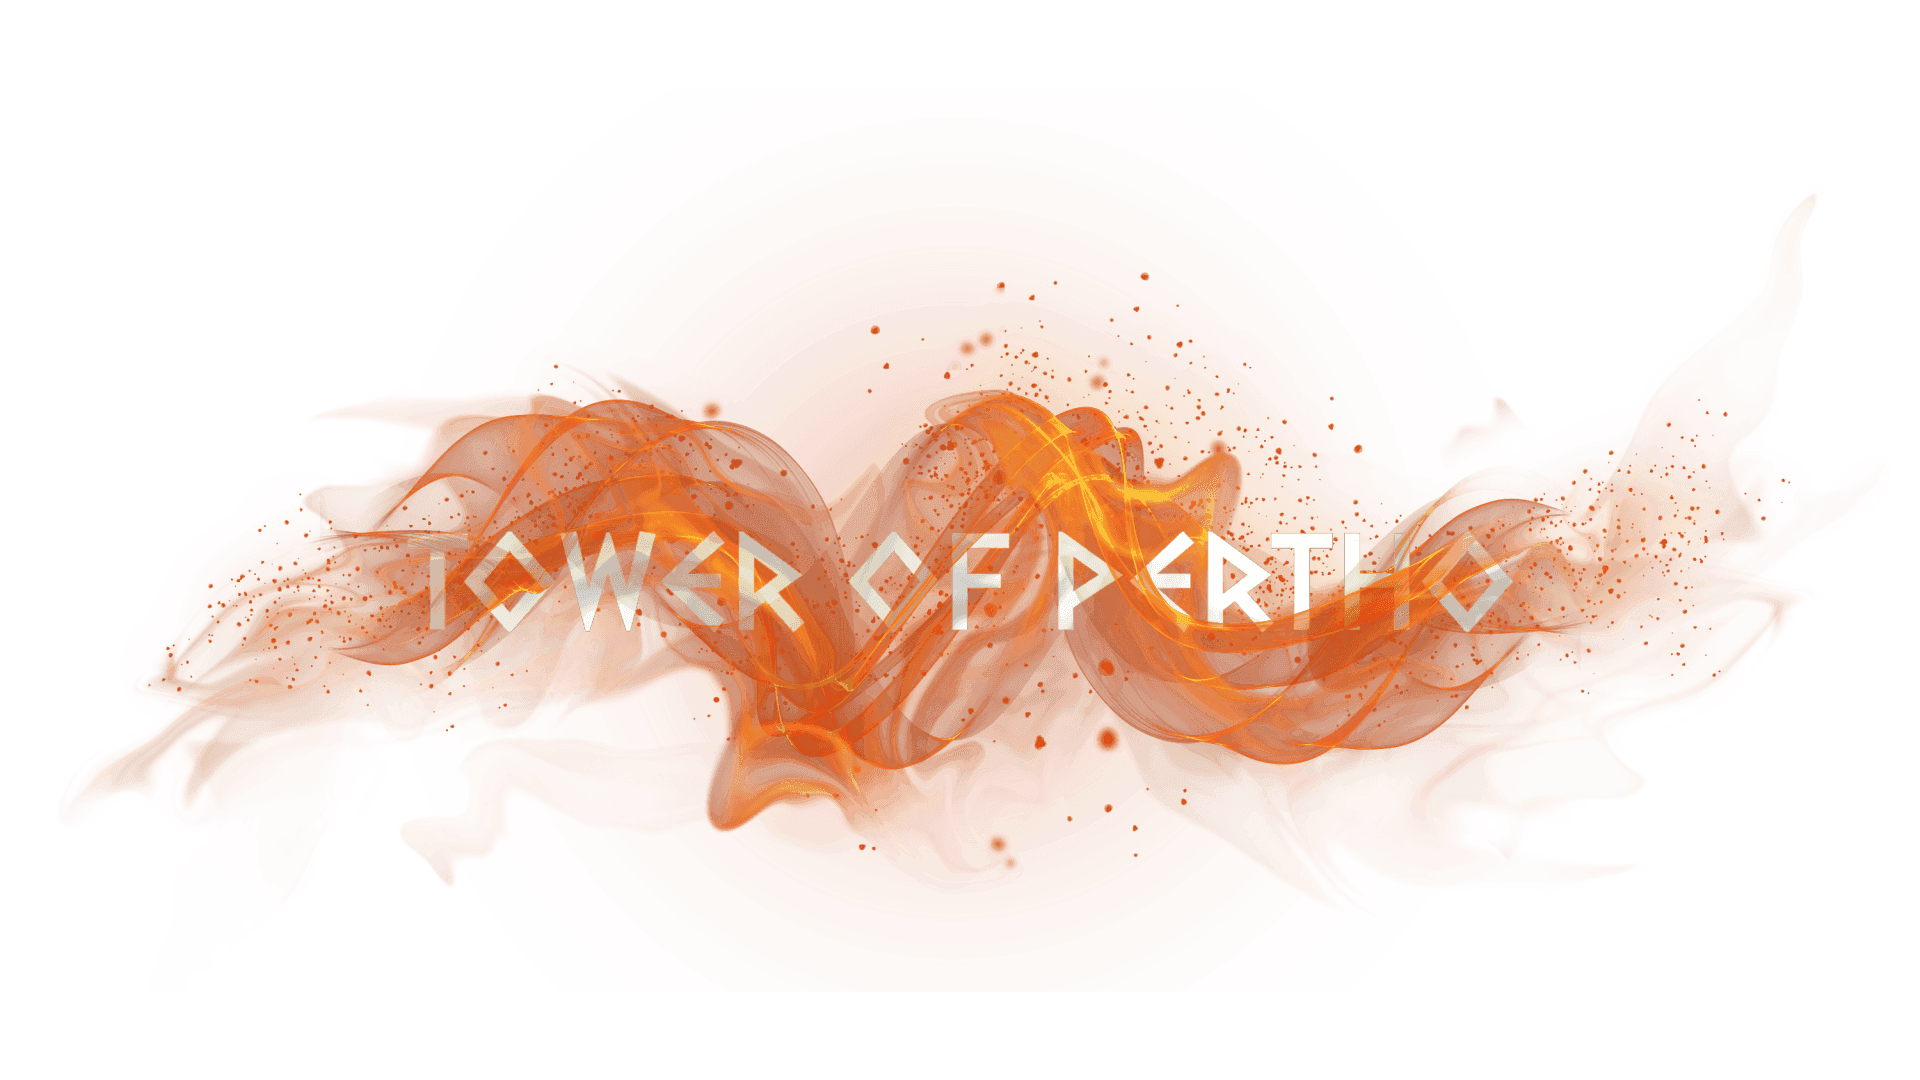 Tower of Pertho